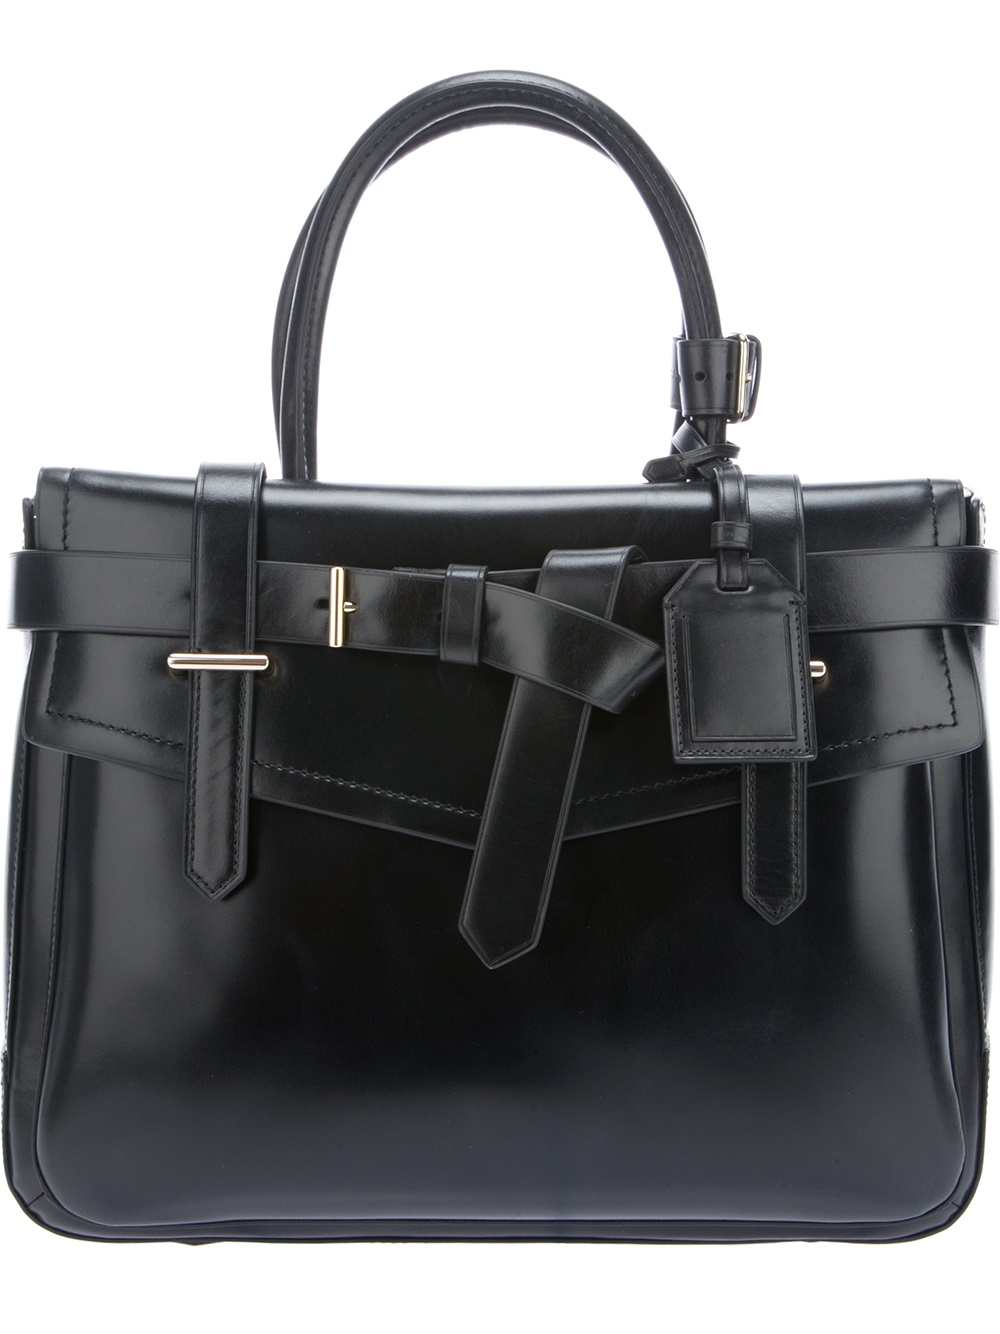 Reed Krakoff Kit Bags: The Whole Kit and Caboodle - Snob Essentials